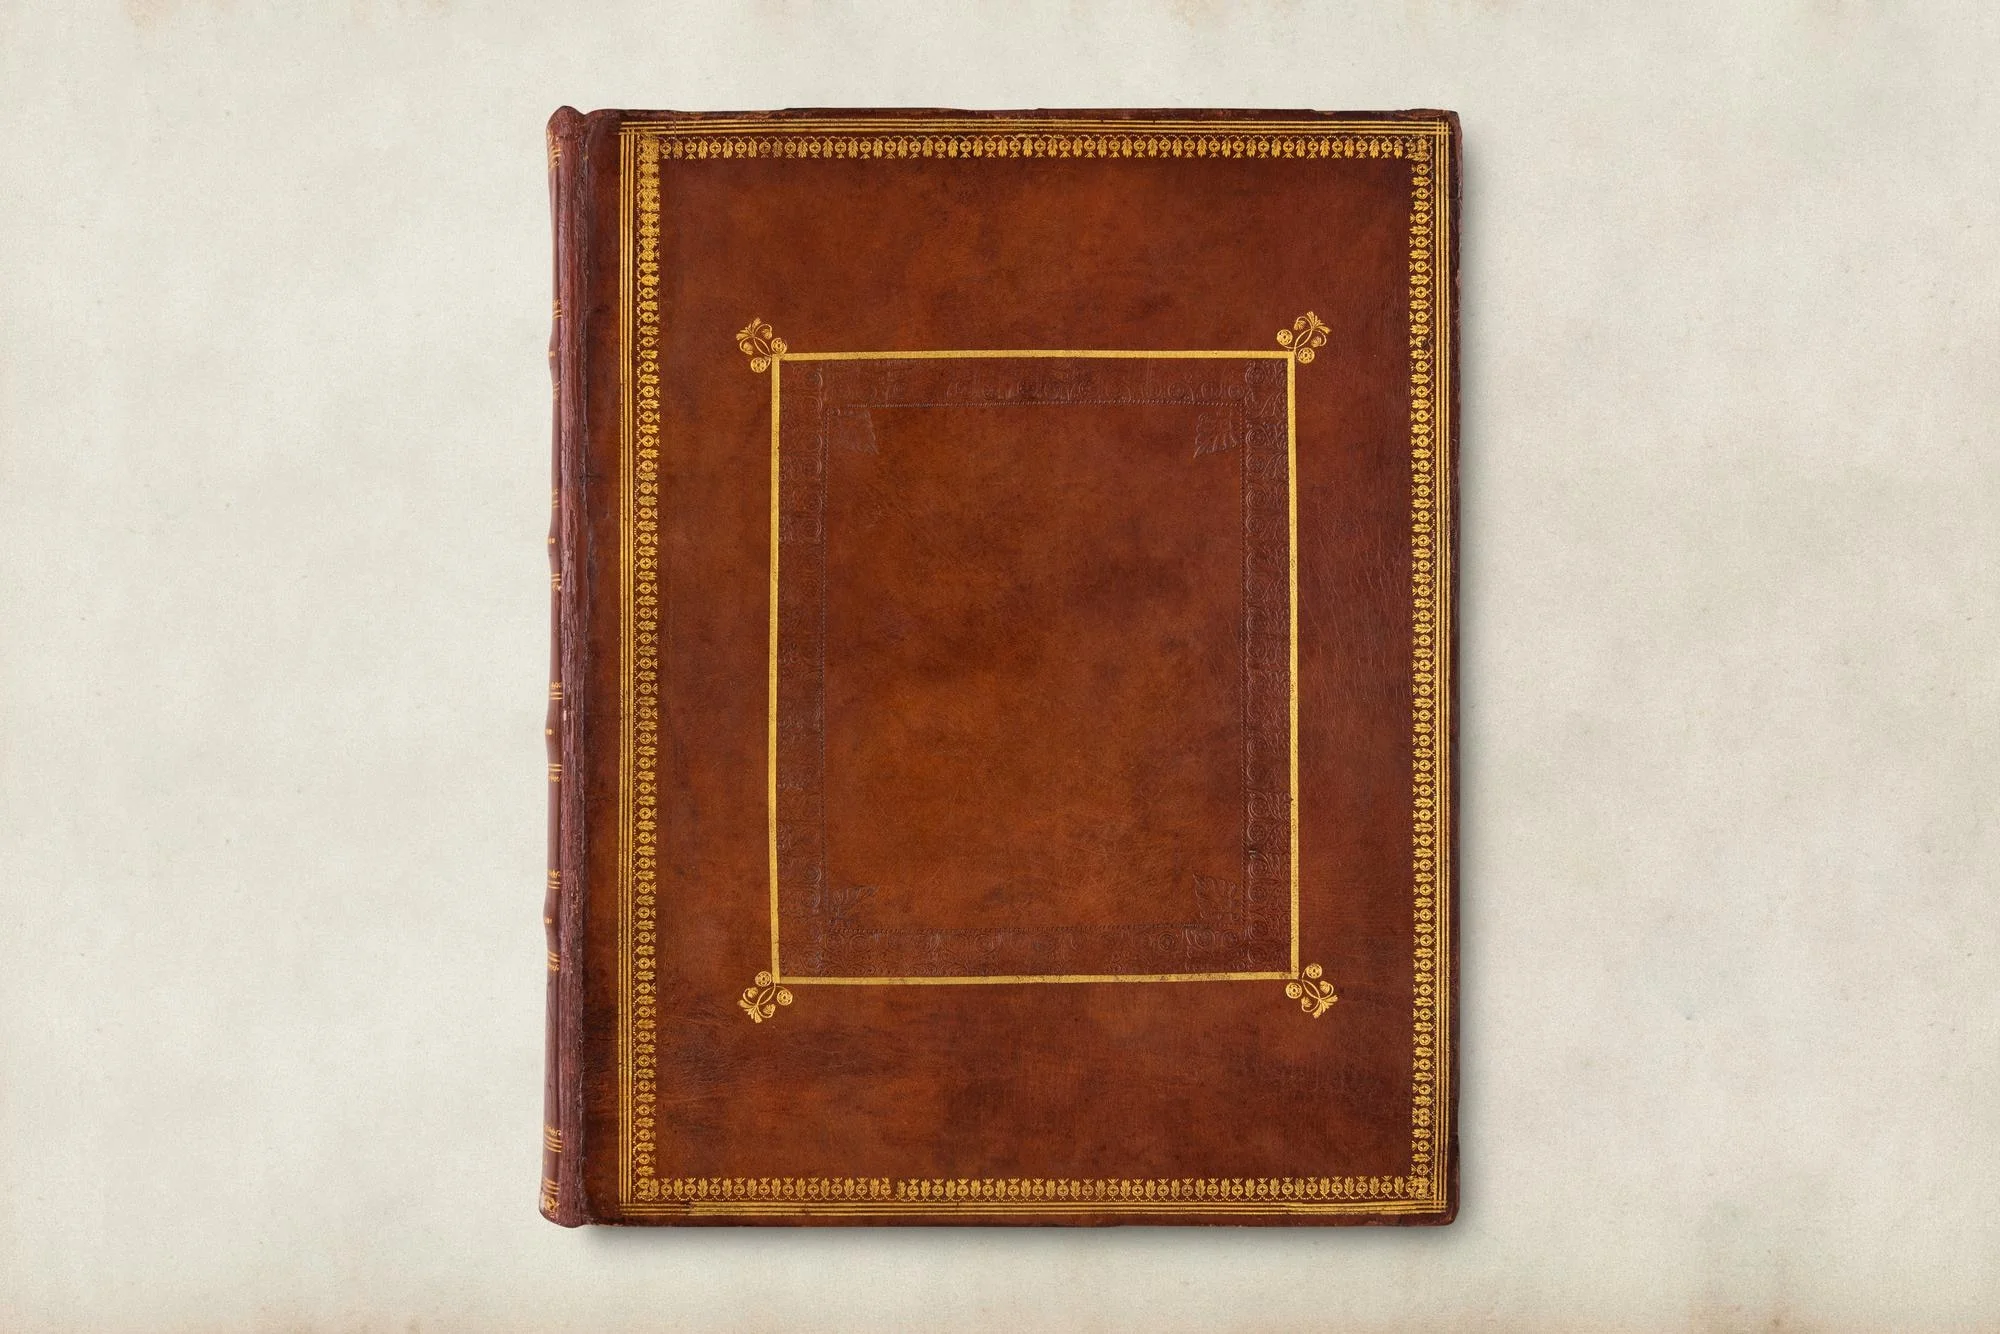 antique book cover brown leather with gold details 53876 160398